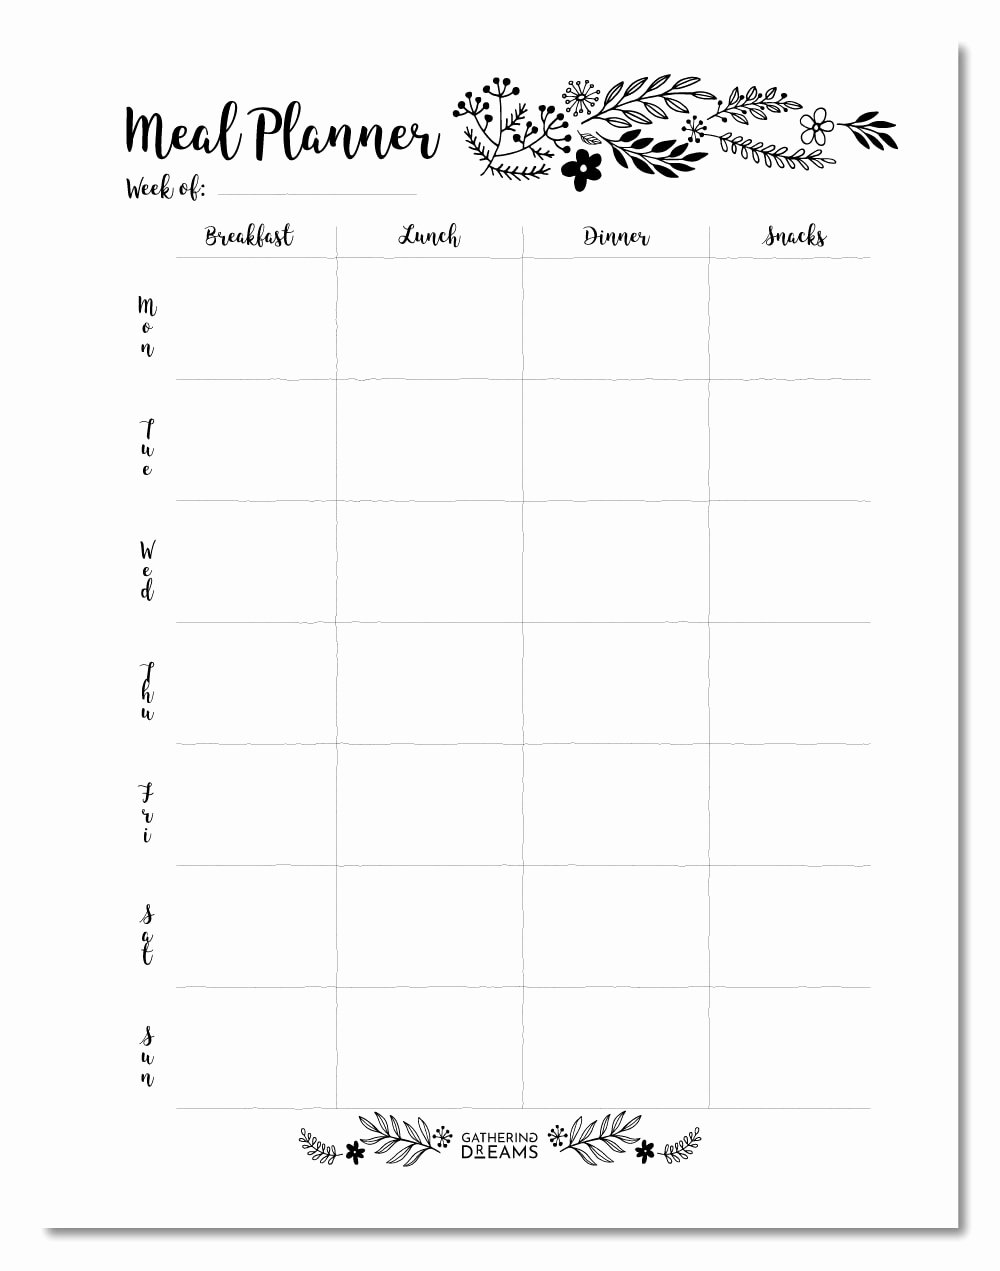 Weekly Meal Planning Template Lovely 4 Meal Planner Templates to Save $500 M [free Download